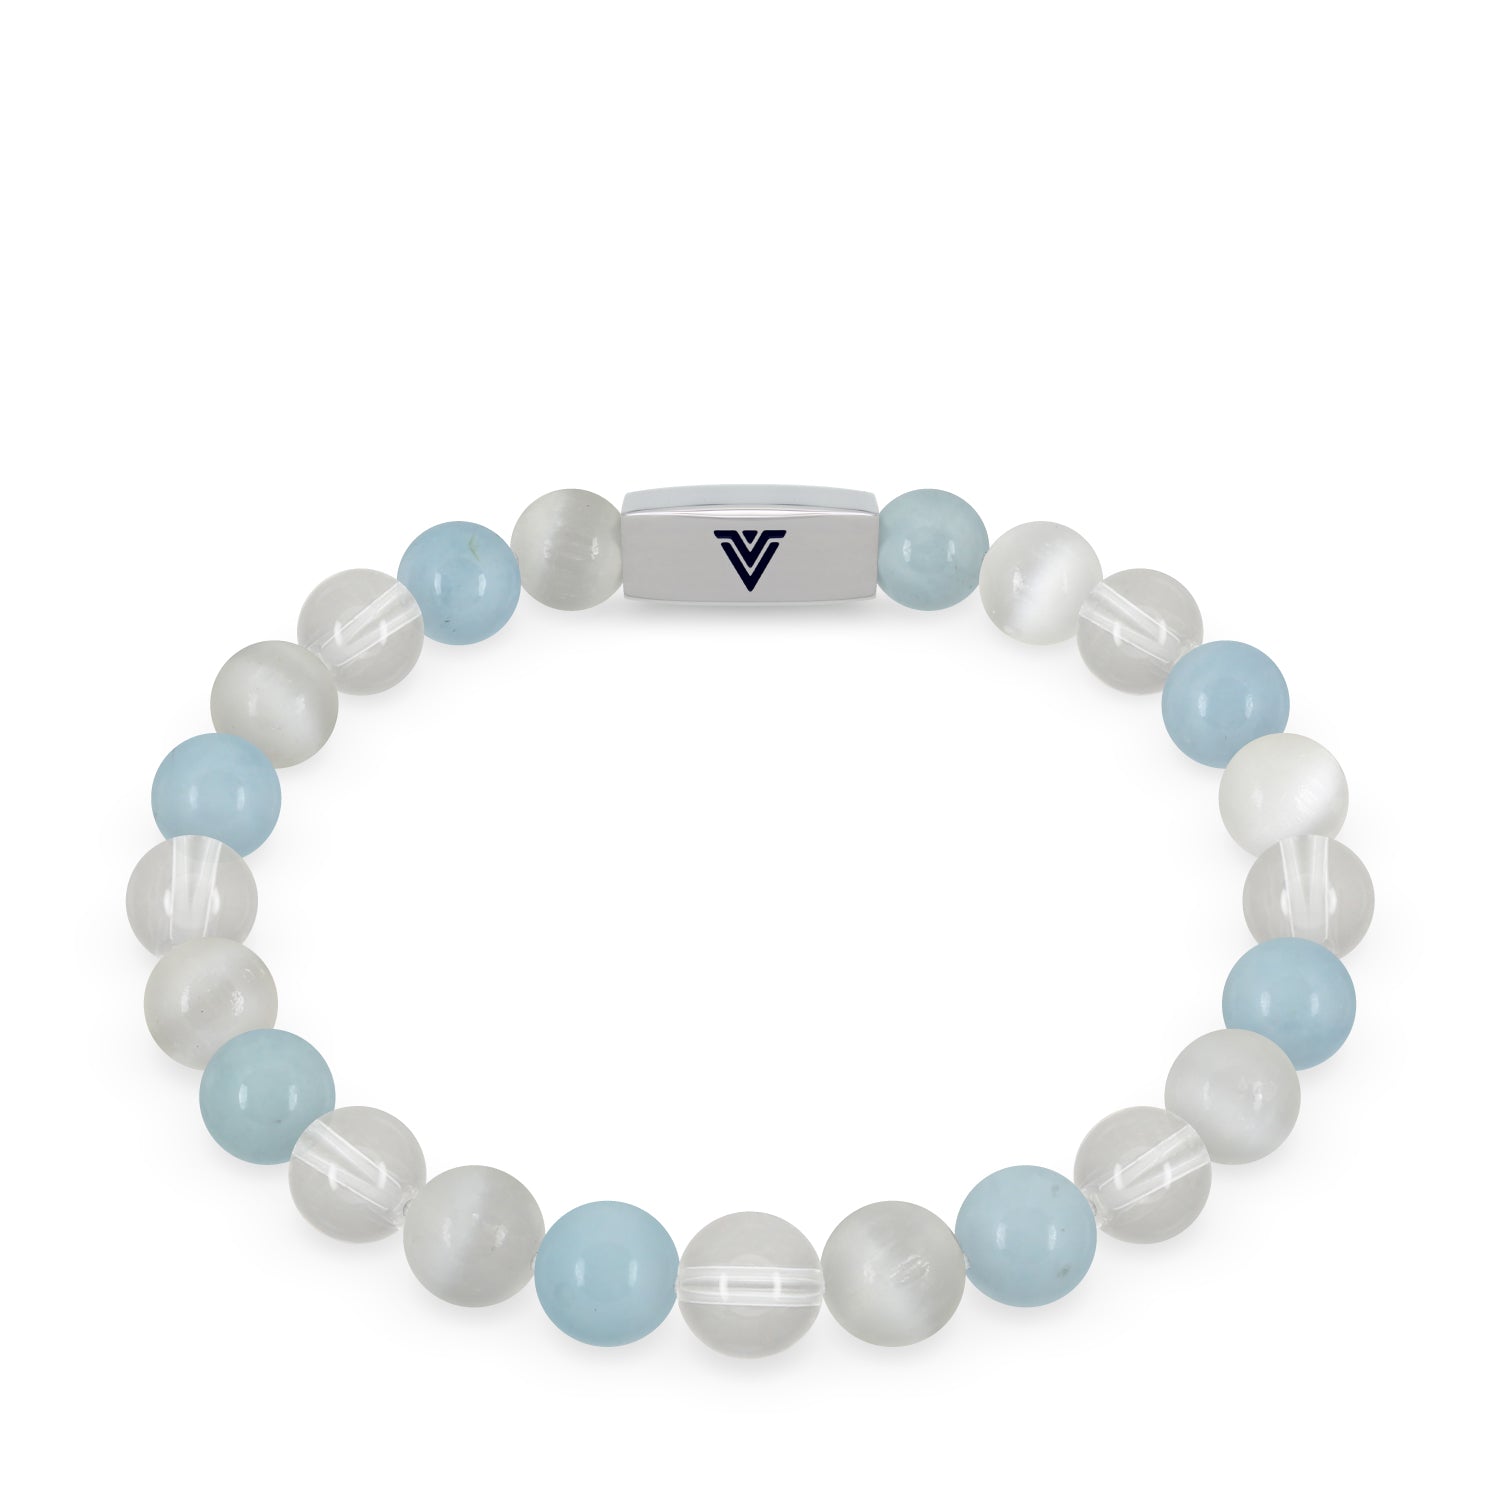 Front view of an 8mm Aquarius Zodiac beaded stretch bracelet featuring Selenite, Aquamarine, & Quartz crystal and silver stainless steel logo bead made by Voltlin